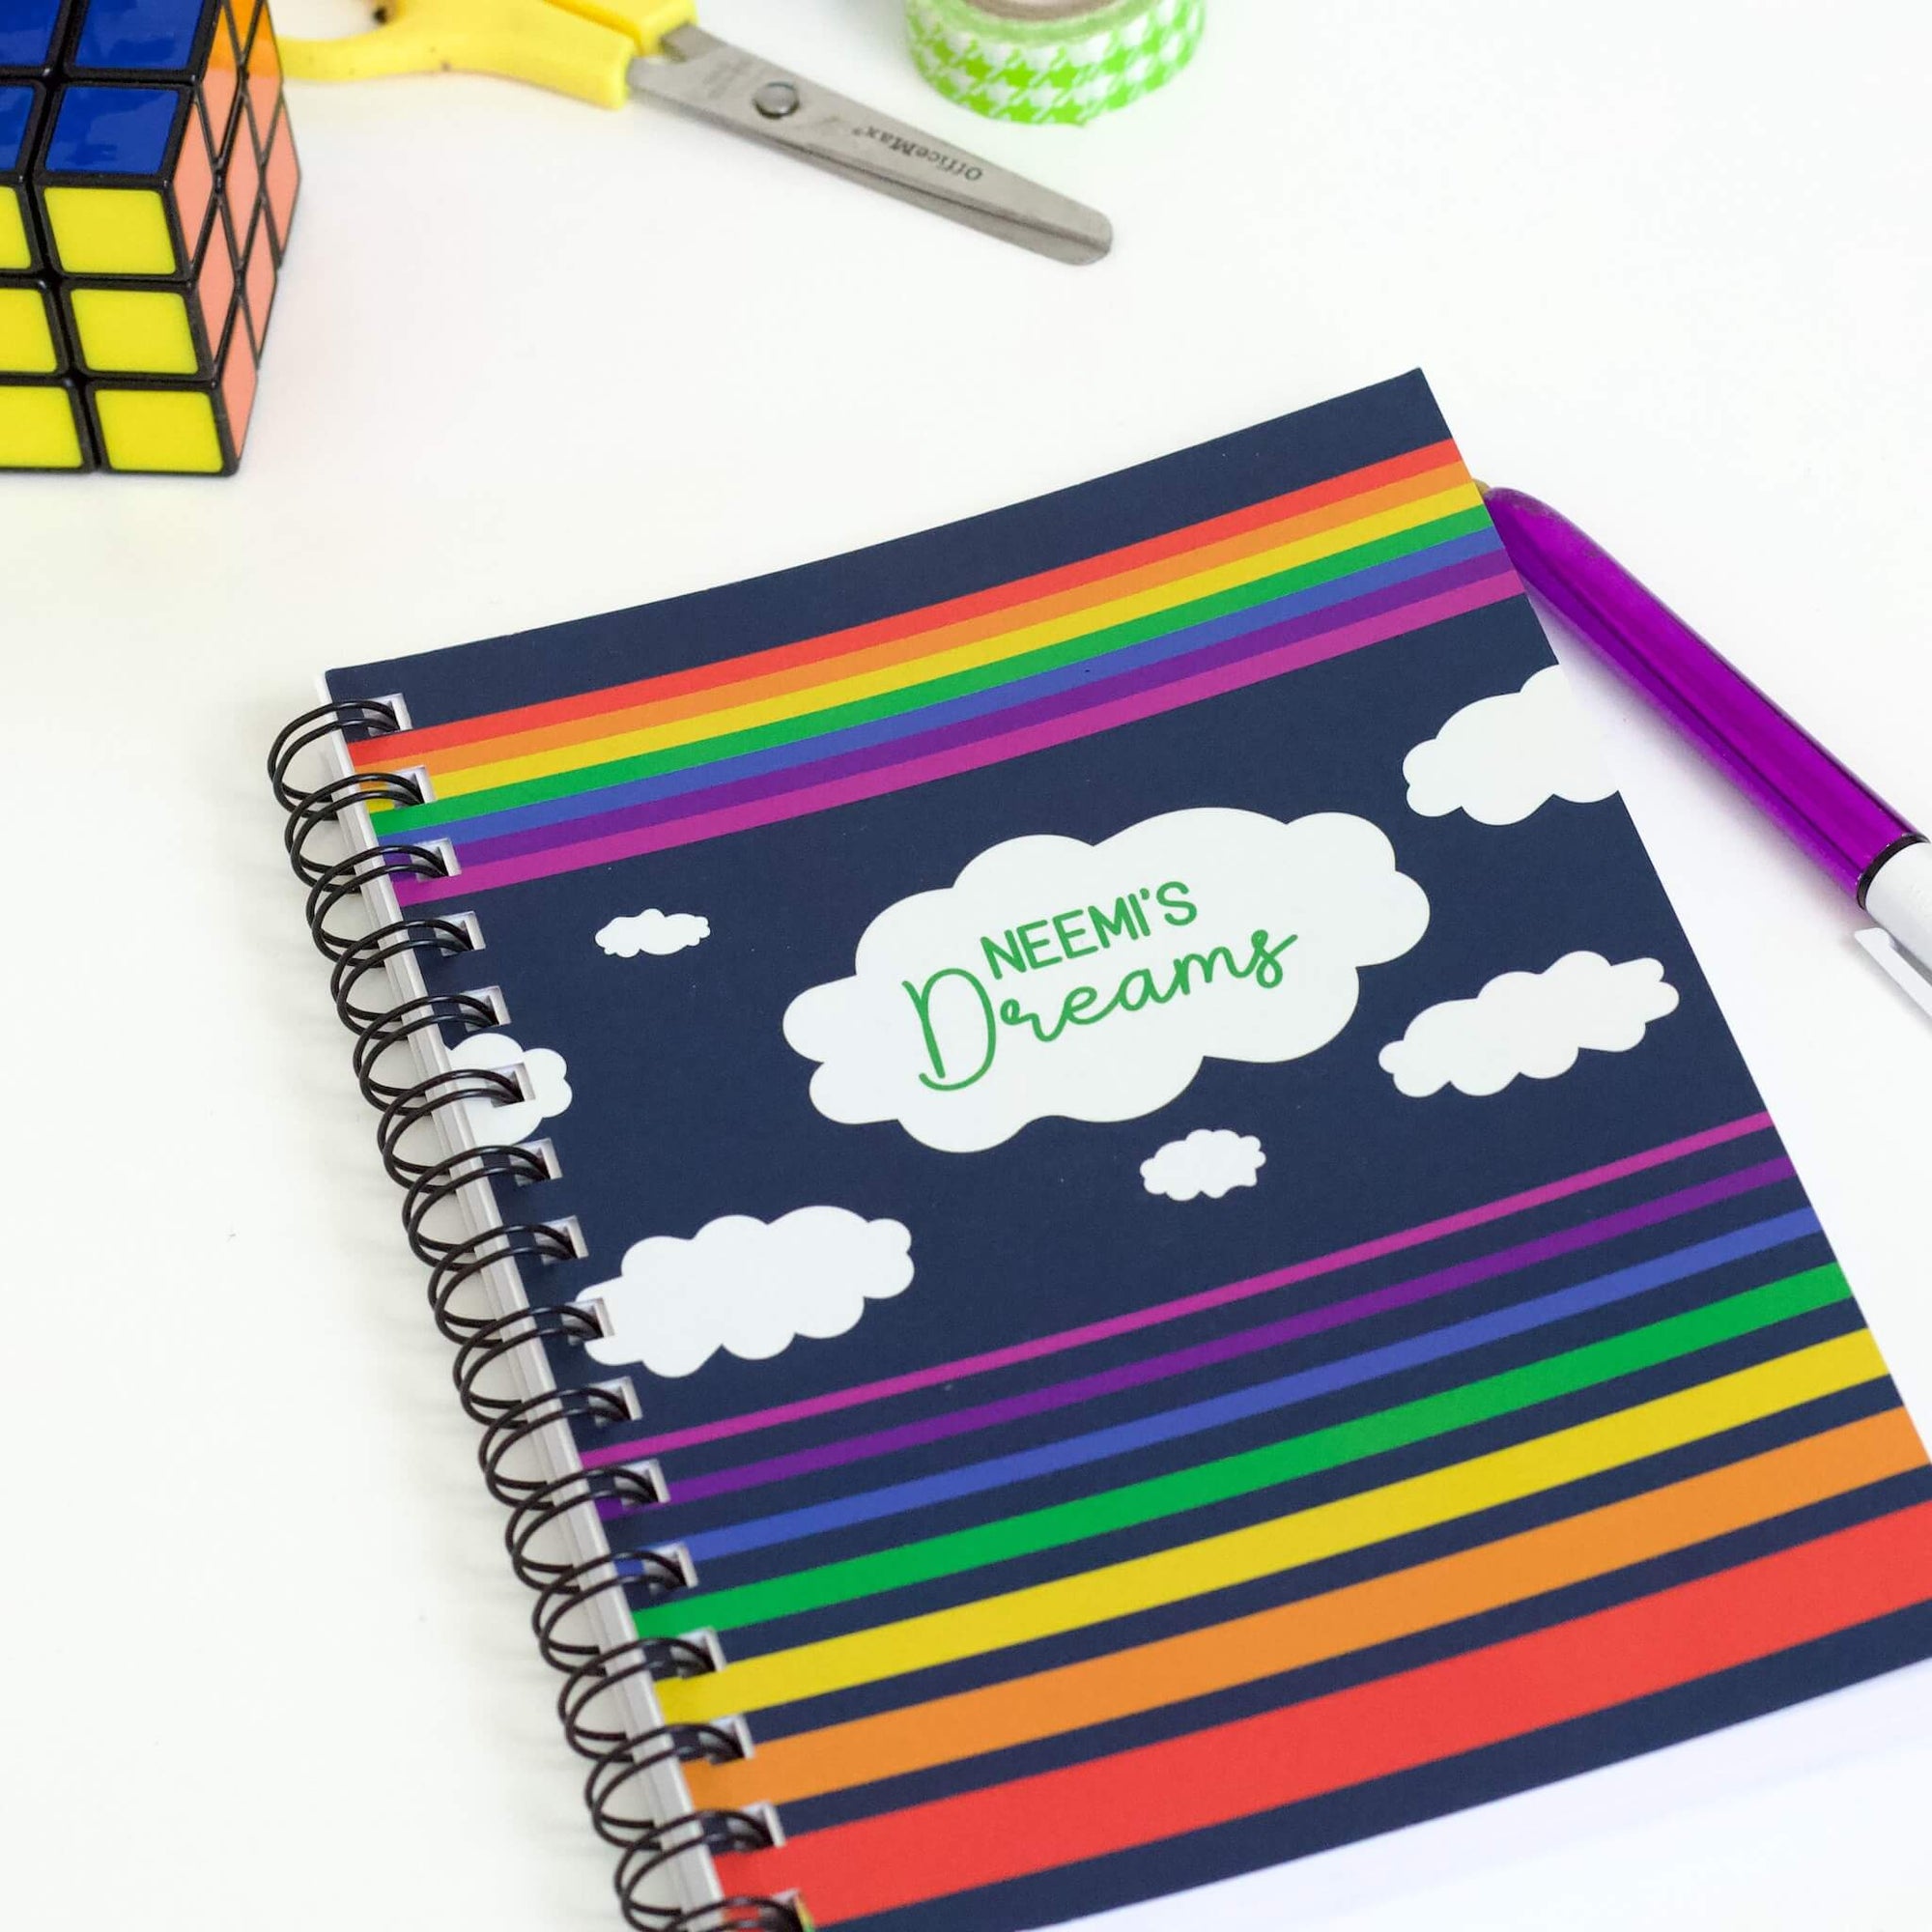 'In the Sky' spiral-bound personalised notebook